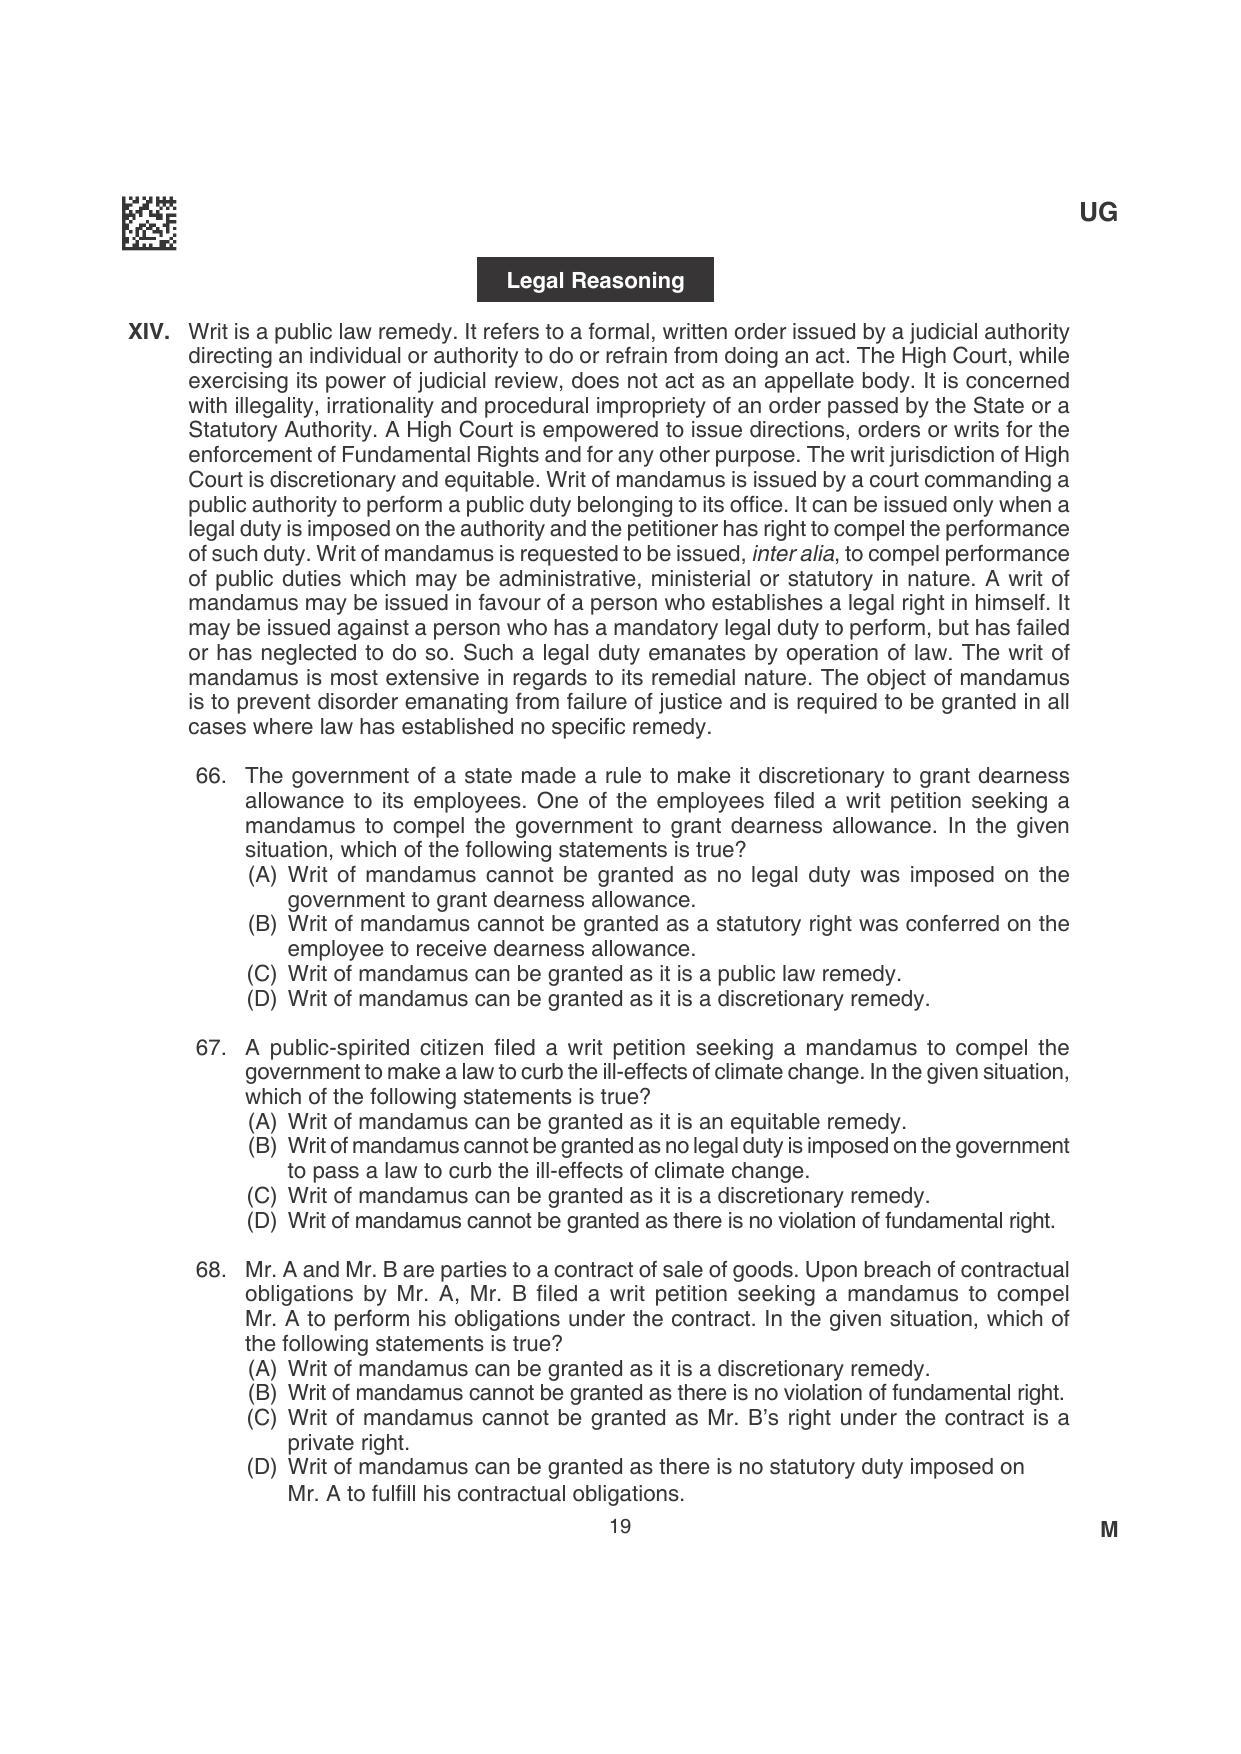 CLAT 2022 UG Question Papers - Page 19